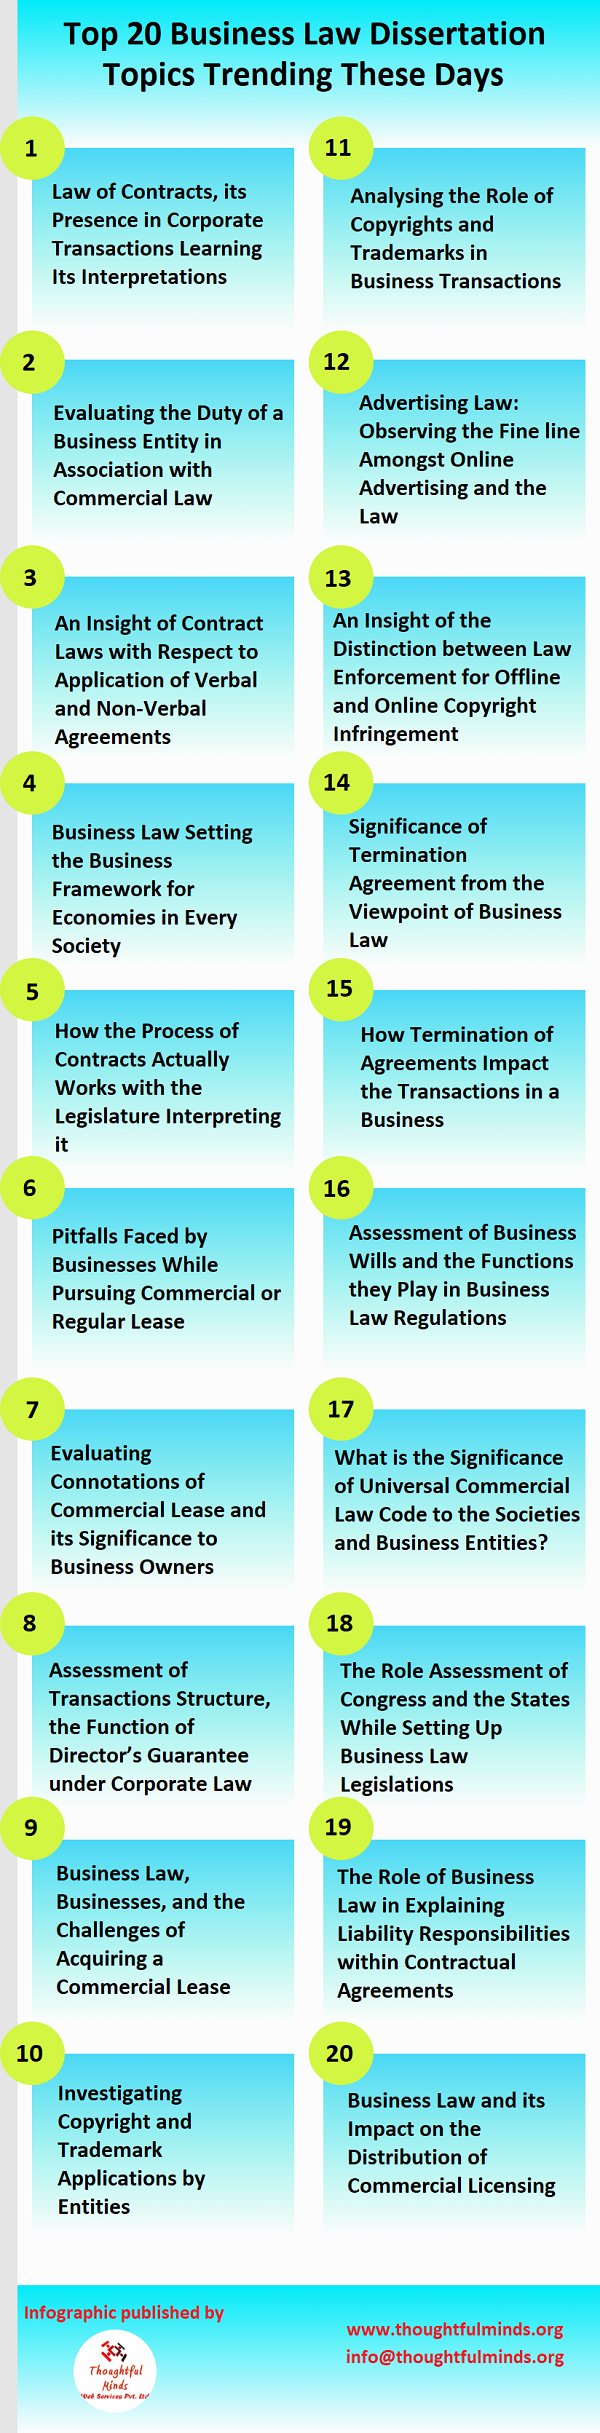 Business Law Dissertation Help Infographic